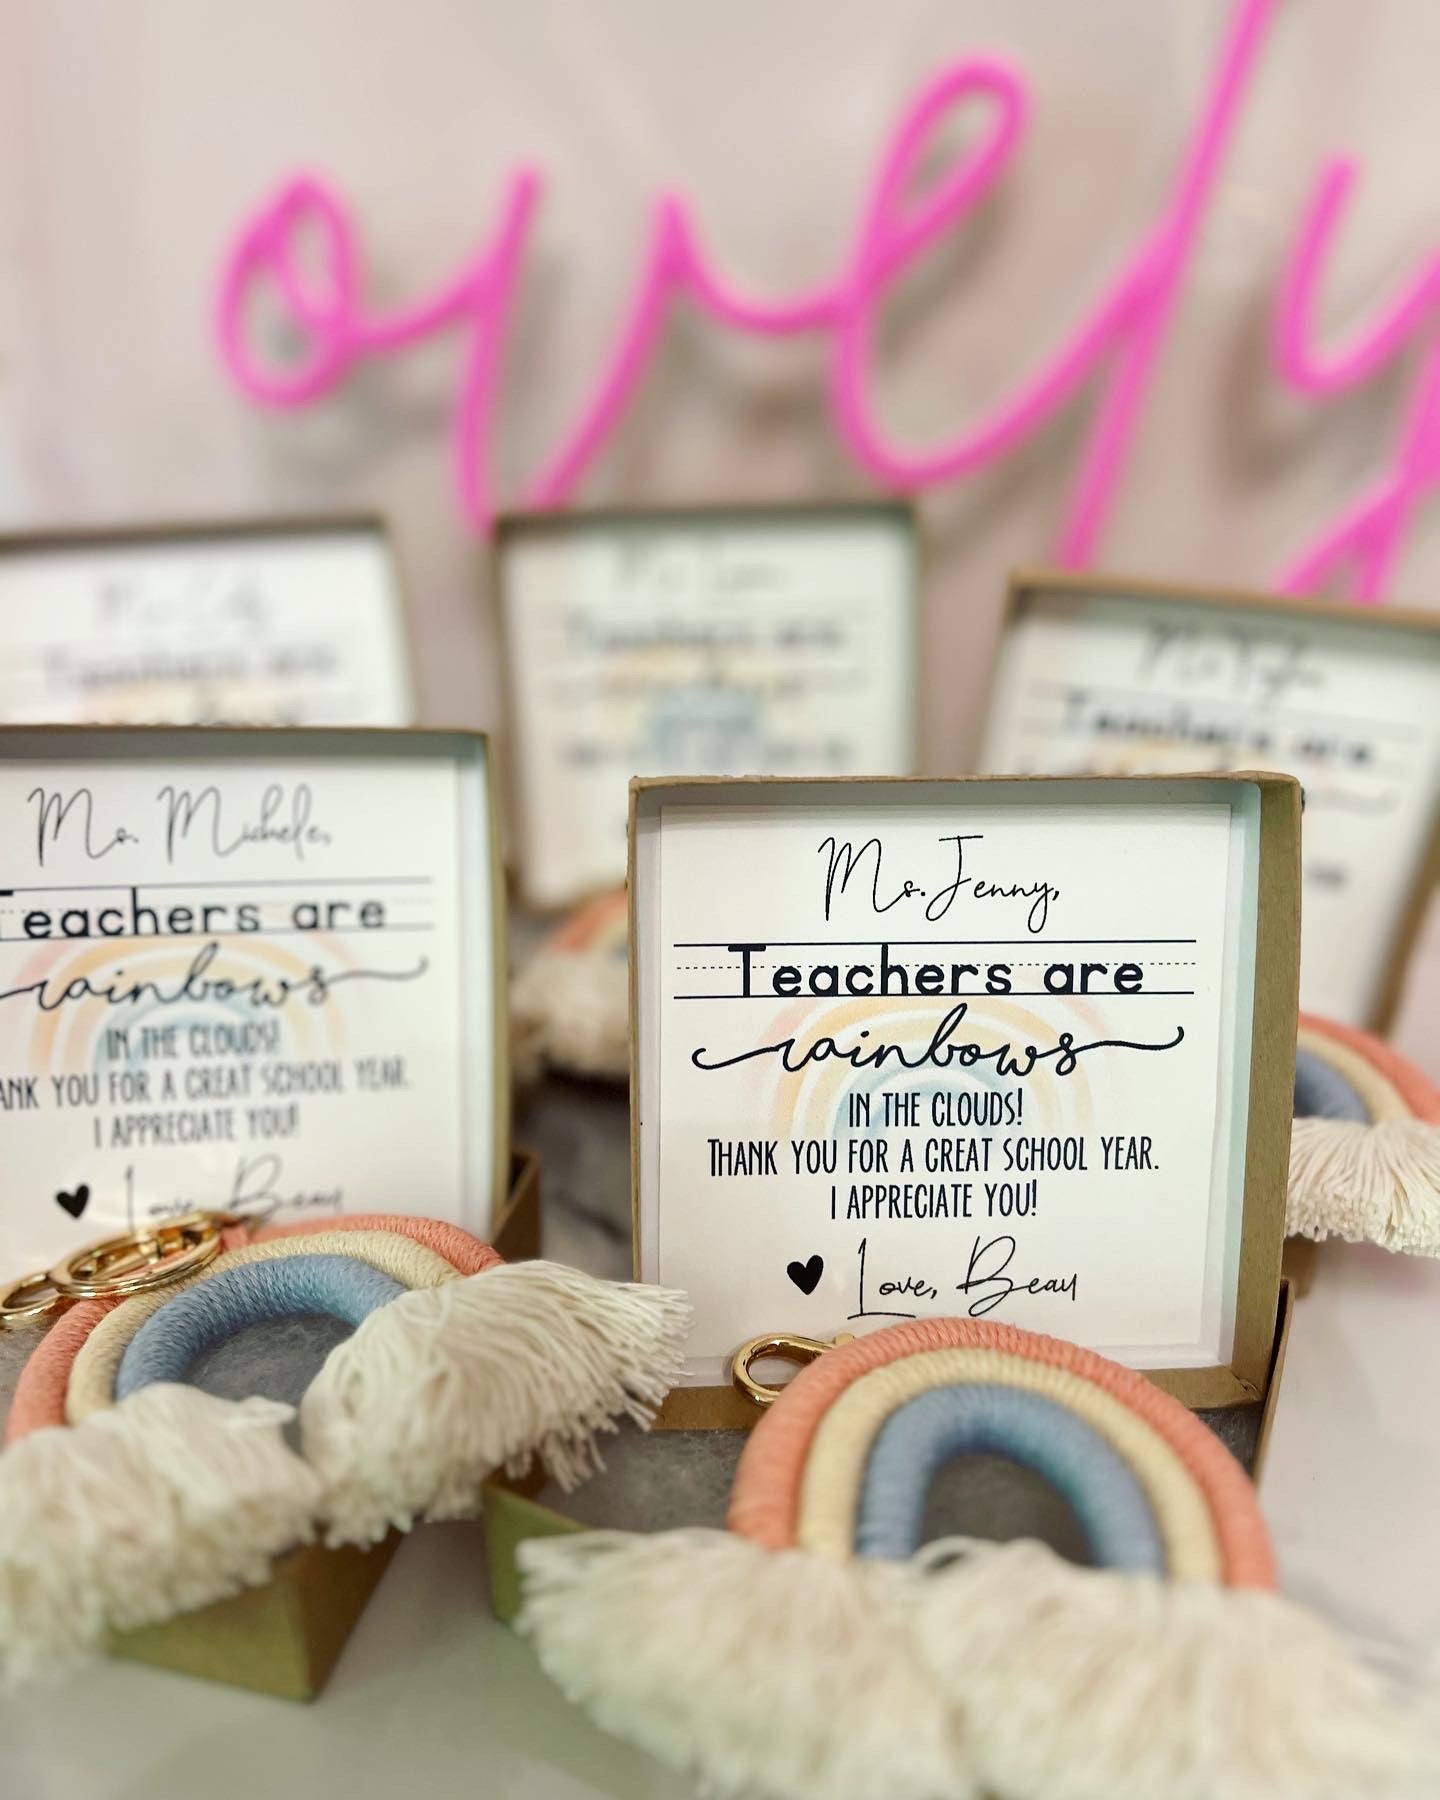 Teachers are rainbows in the clouds thank you gift